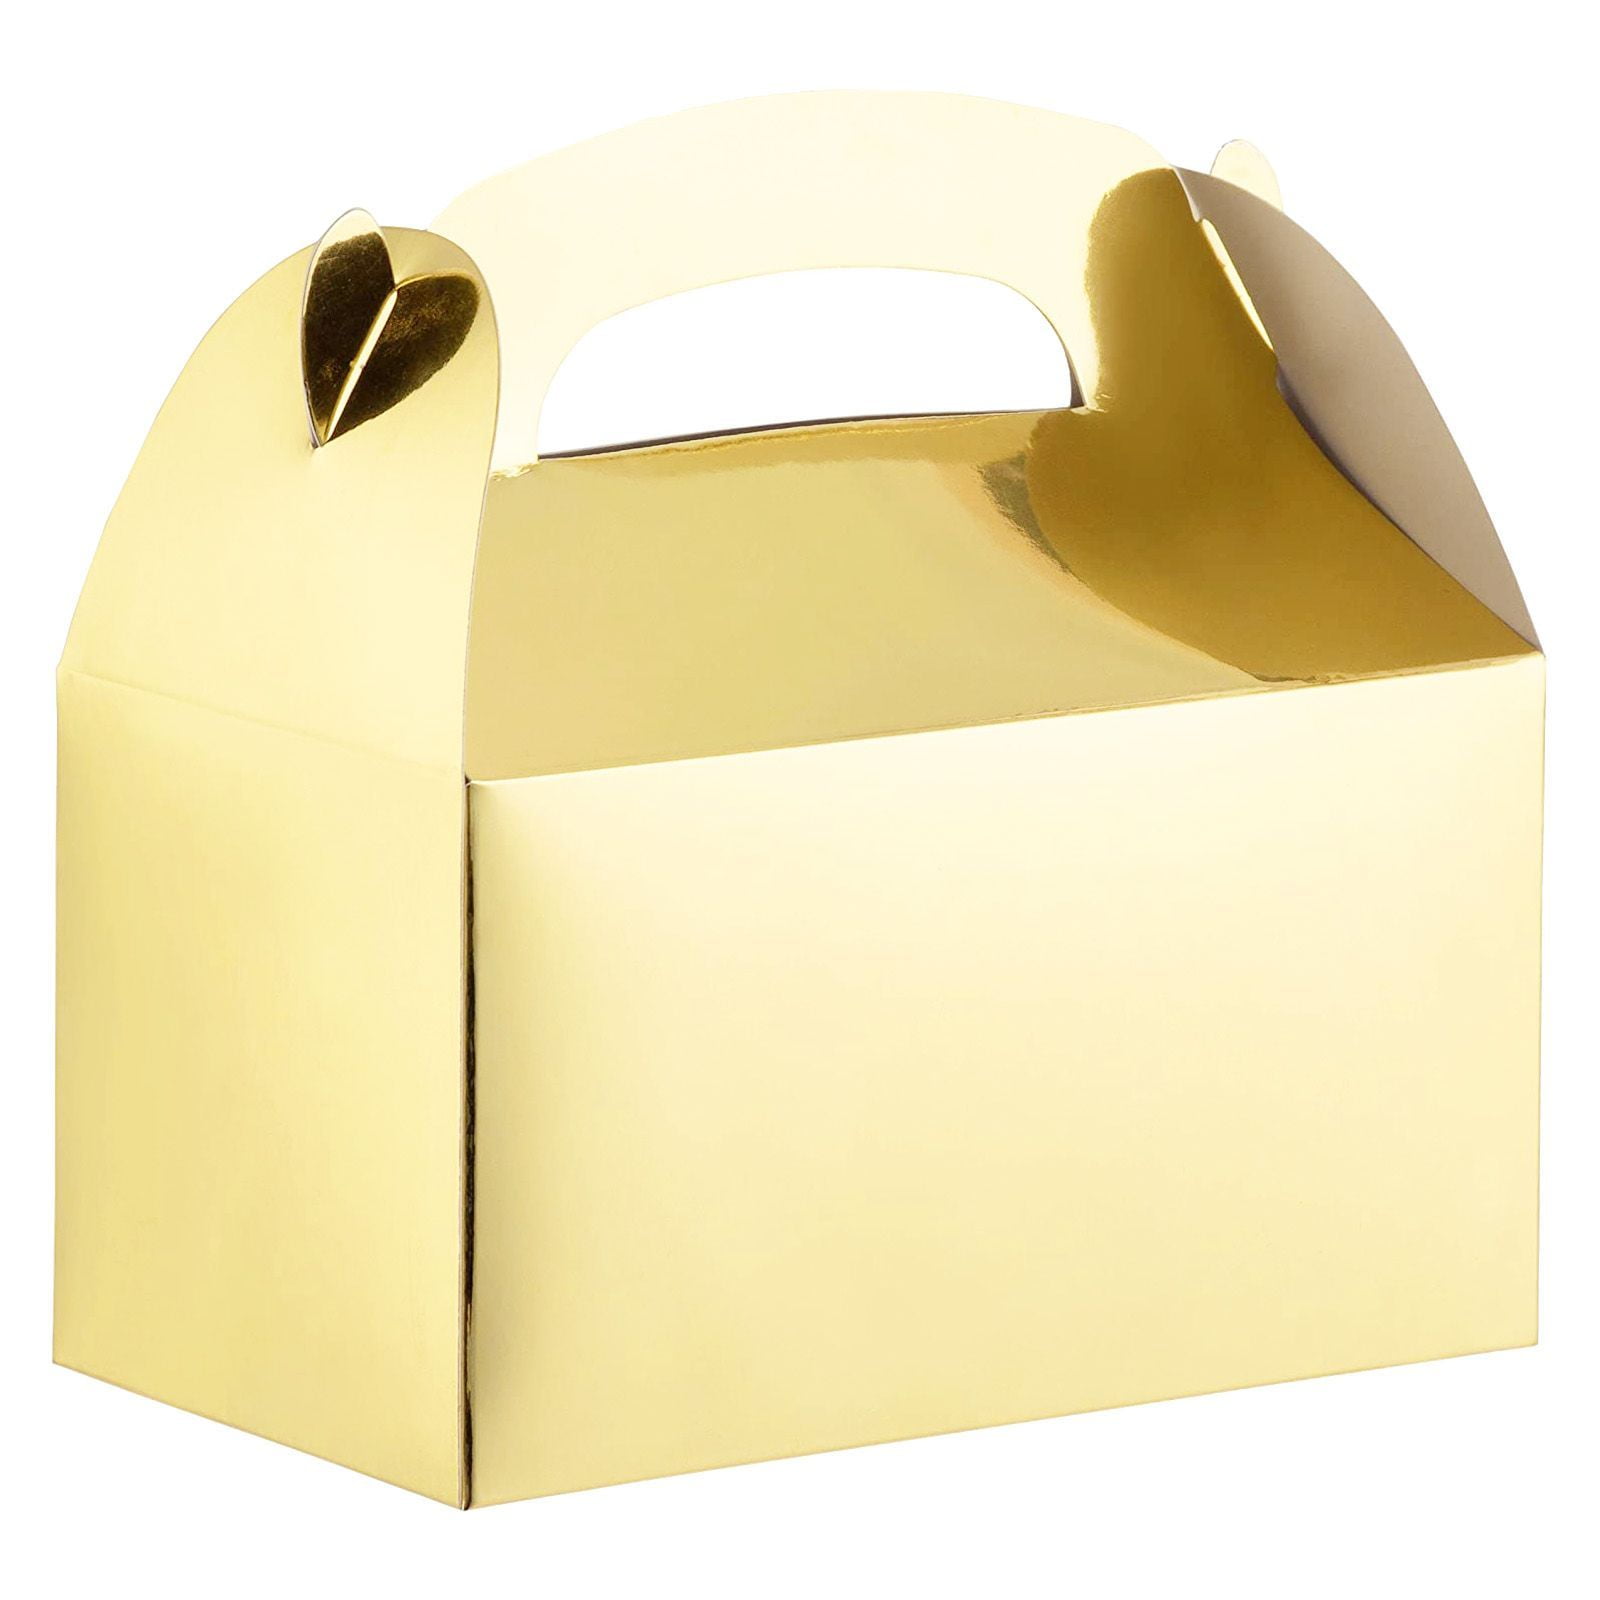 GIFT BOXES 10 GOLD 6X6 INCH CHOCOLATE BOXES SWEET BOXES 